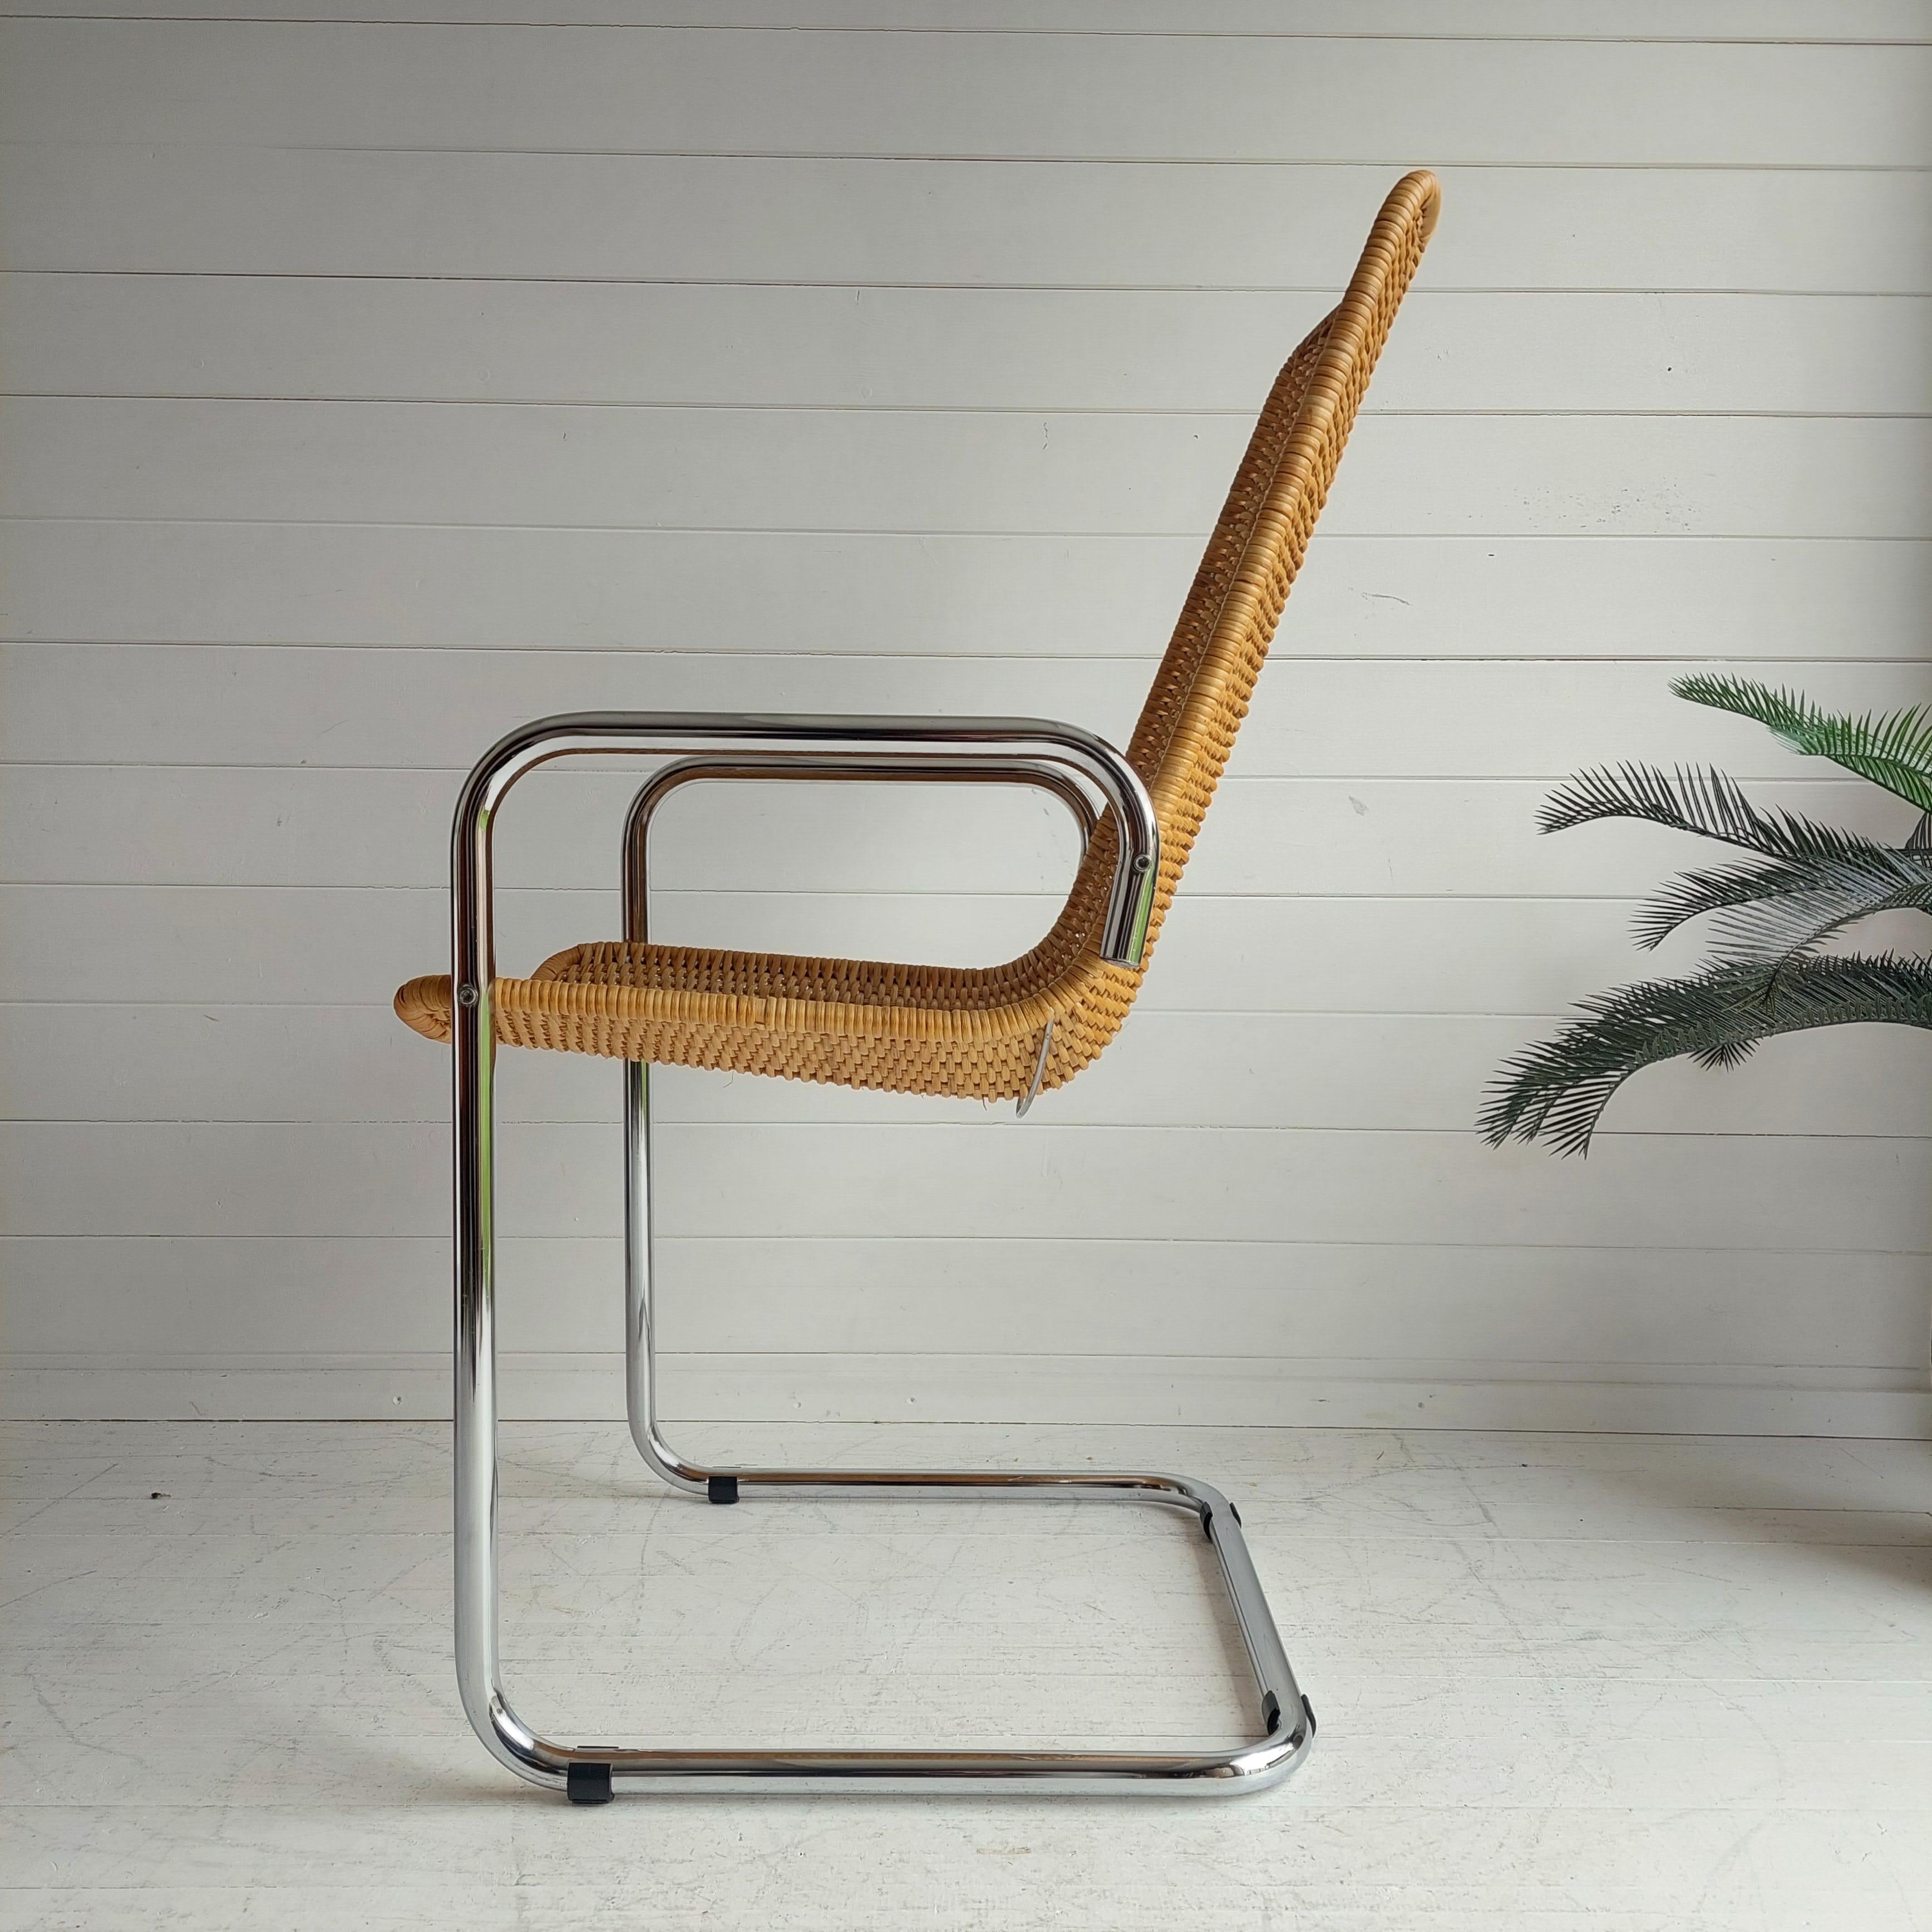 Here is a great, rare example of Mid-Century Modern design from the 1970's - Bauhaus style Breuer / Mies Van Der Rohe 
A side chair in the style of Cidue, Italy. 
A cantilever chrome frame holds a rattan shell highback seat. 
Classic piece. Bare